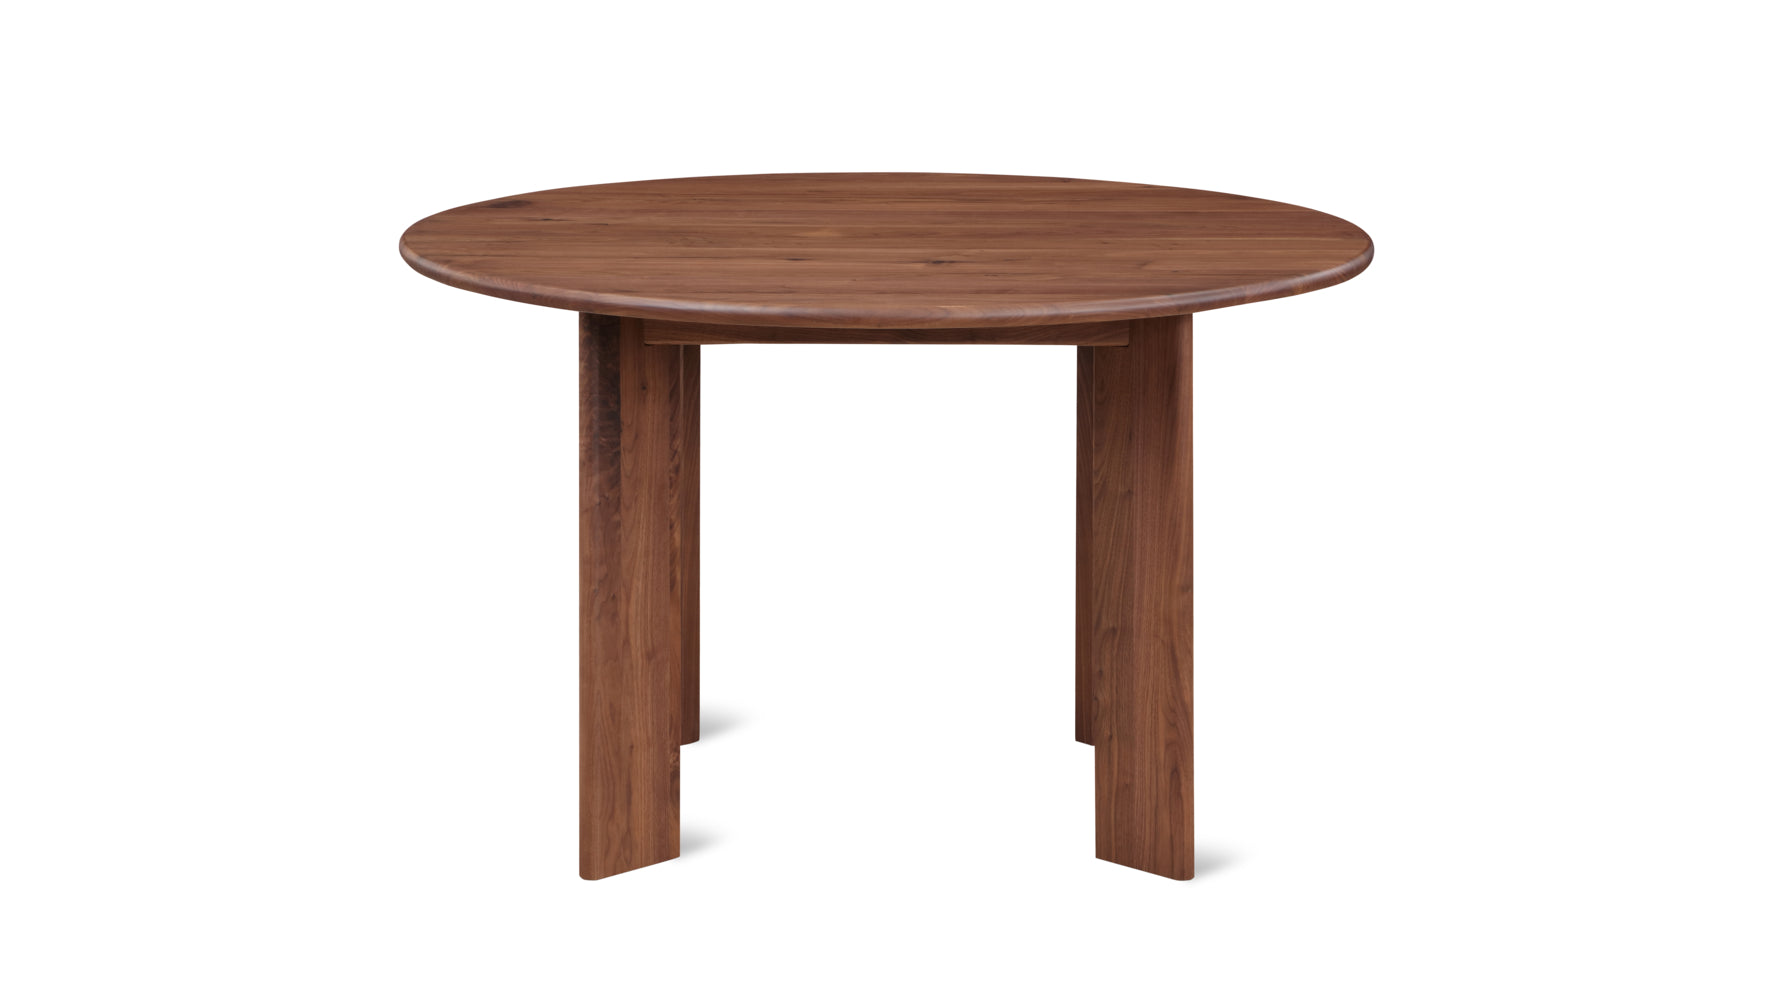 Frame Round Dining Table, Seats 4-5 People, Walnut - Image 4